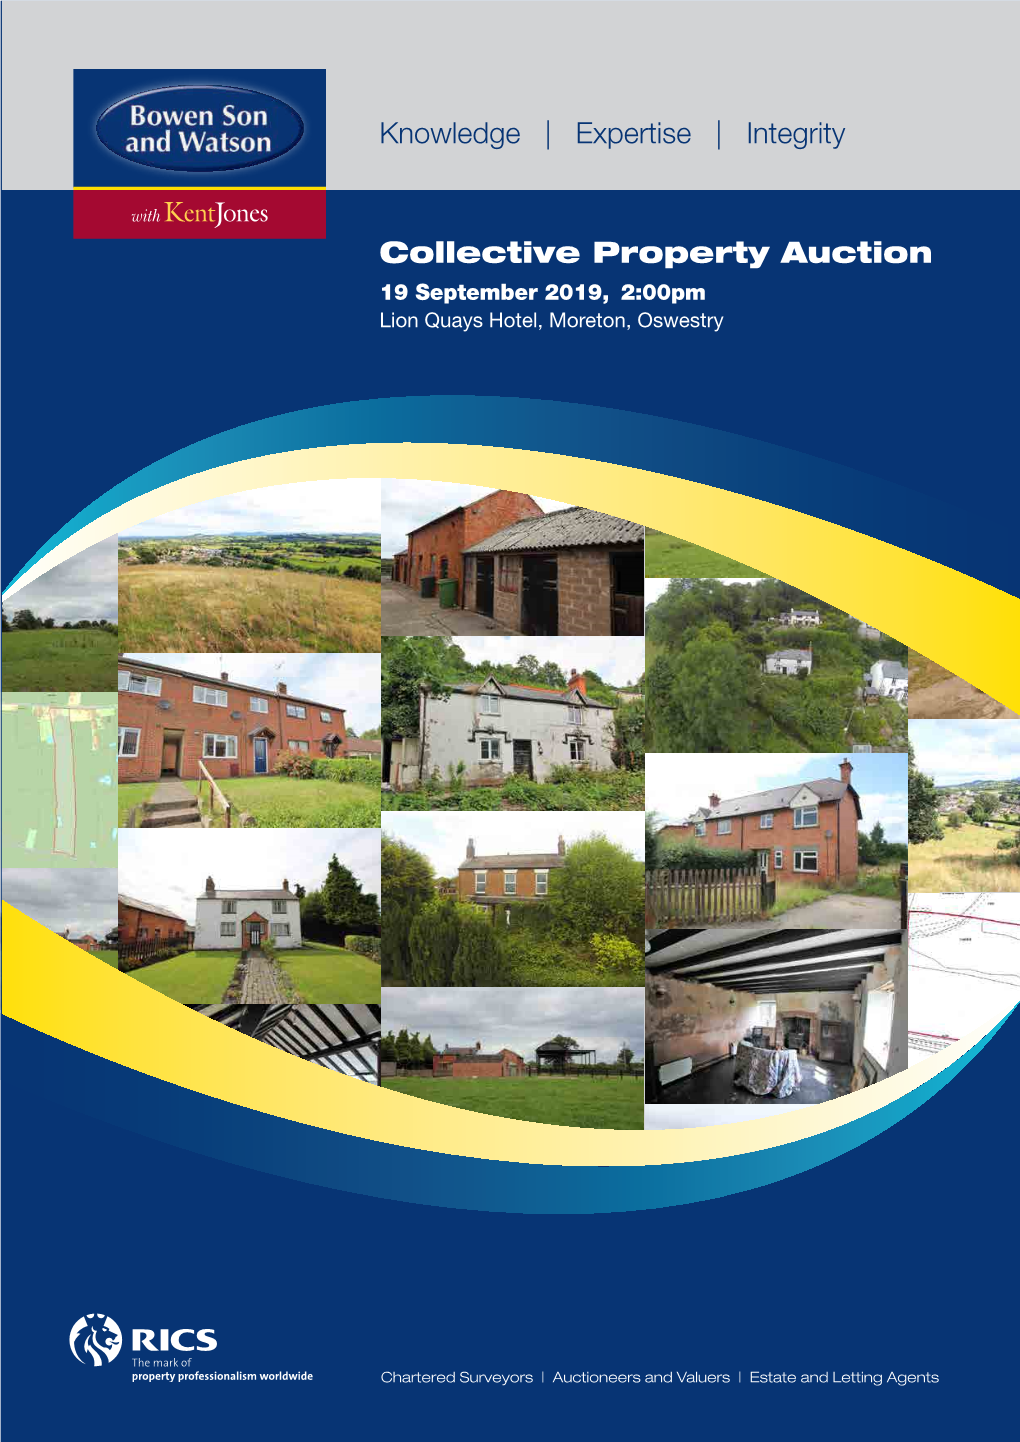 Collective Property Auction Knowledge